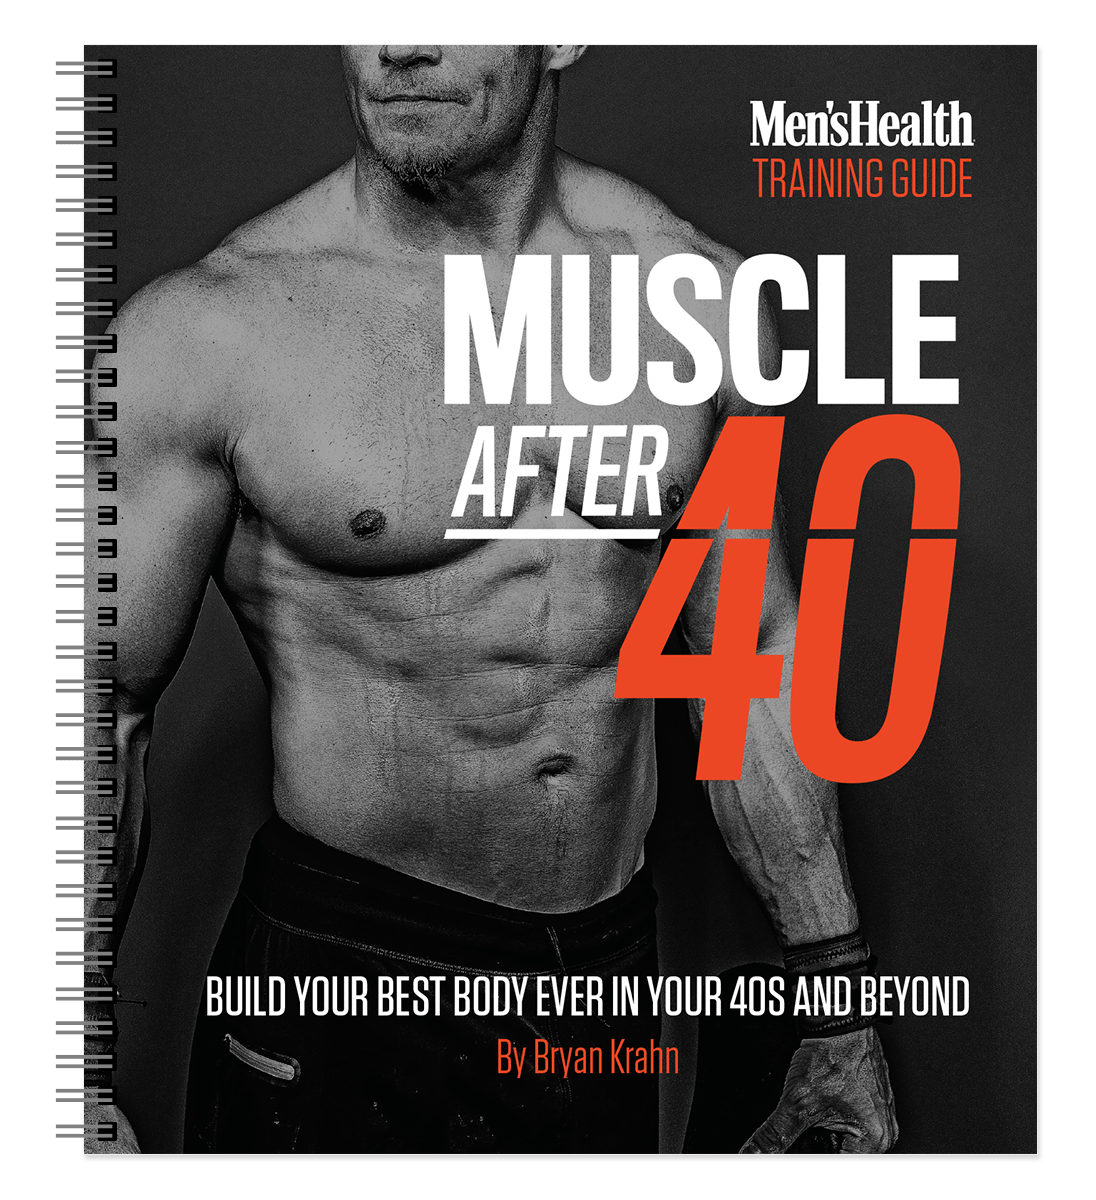 Build Muscle After 40 Guide 